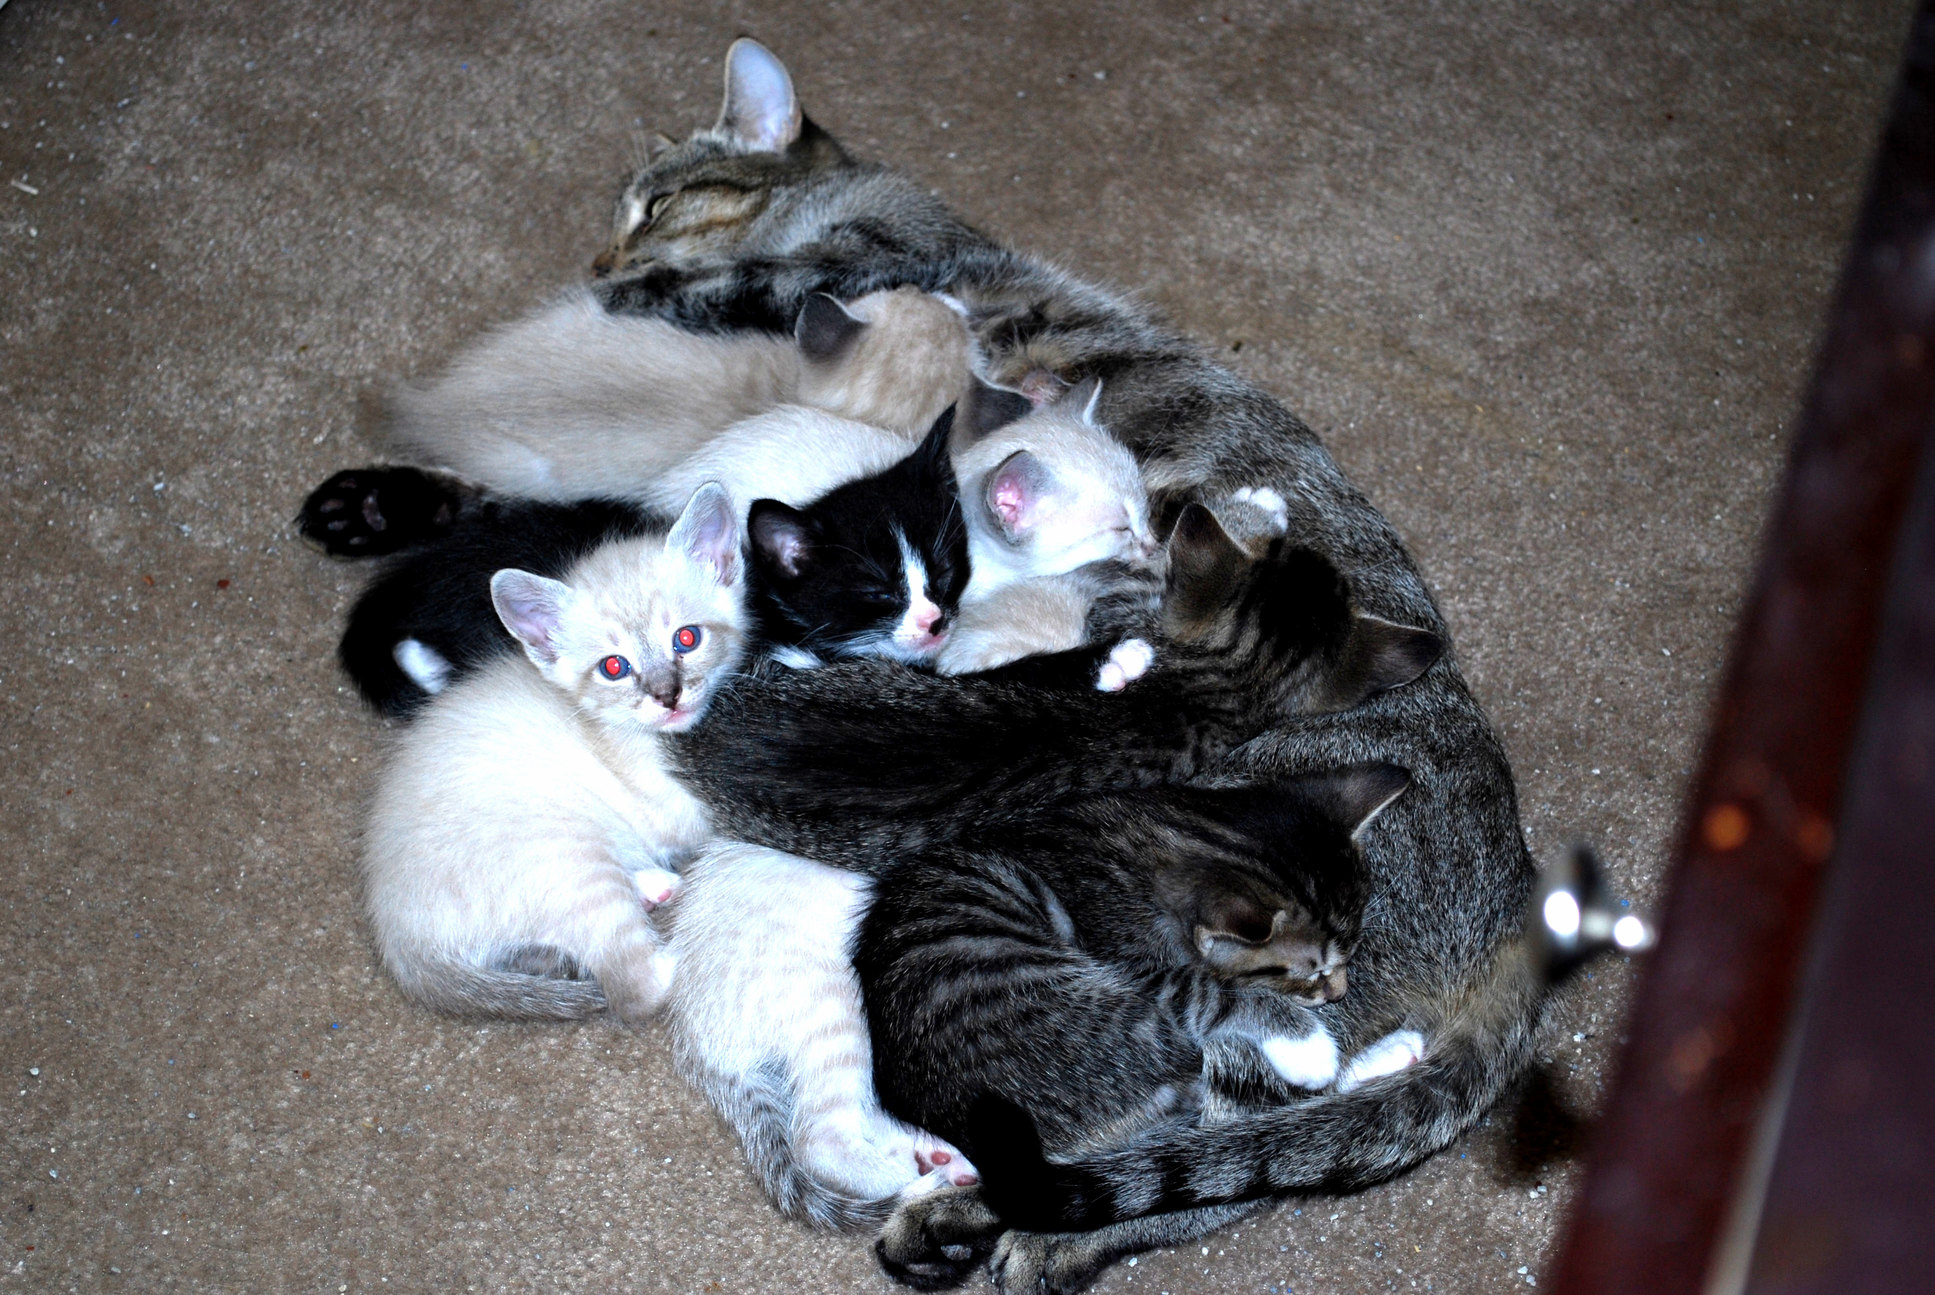 Good job mom. now this is a cat pile